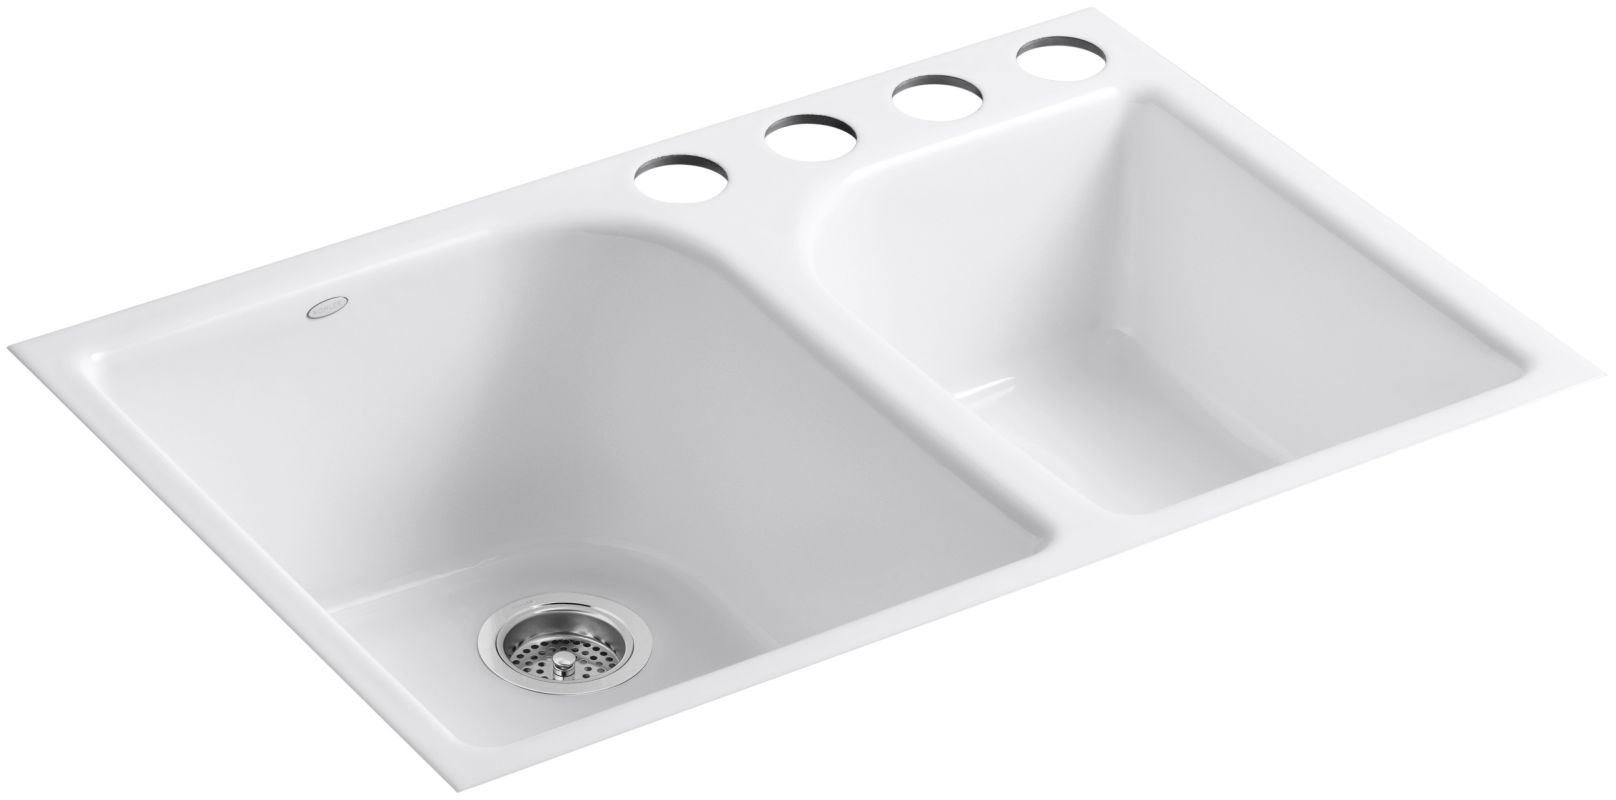 Faucet.com | K-5931-4U-0 in White by Kohler - Click to view larger image